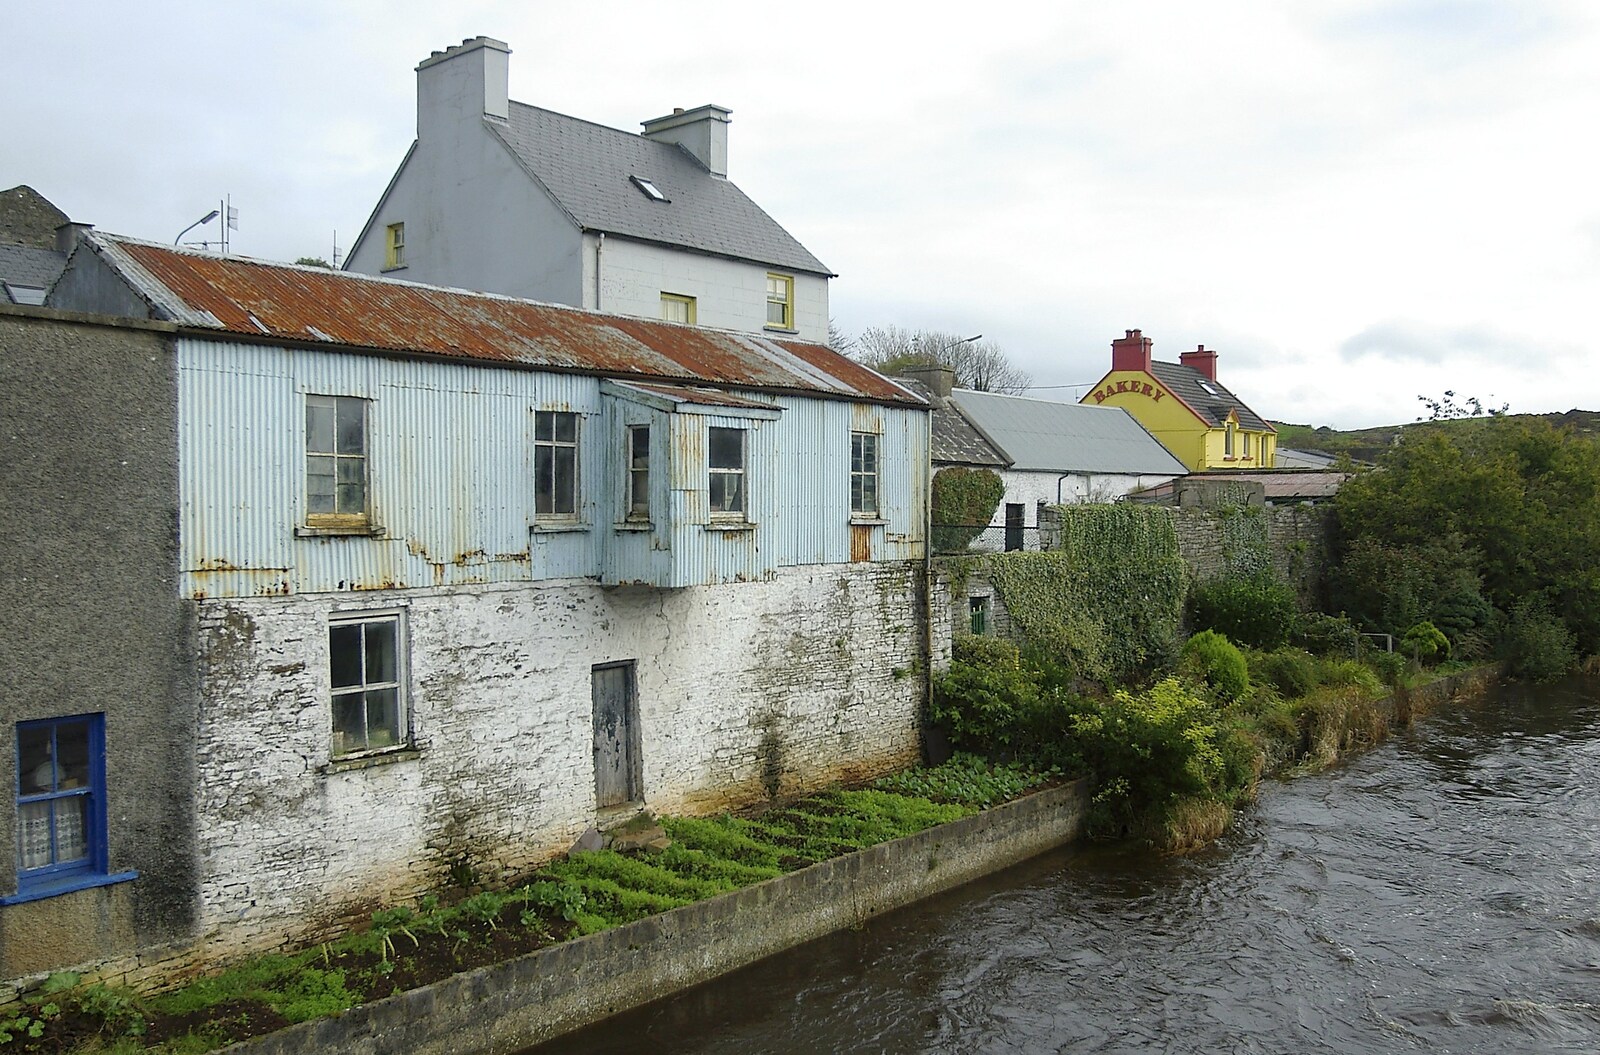 Buildings by the river from Corofin, Ennistymon and The Burran, County Clare, Western Ireland - 27th October 2006